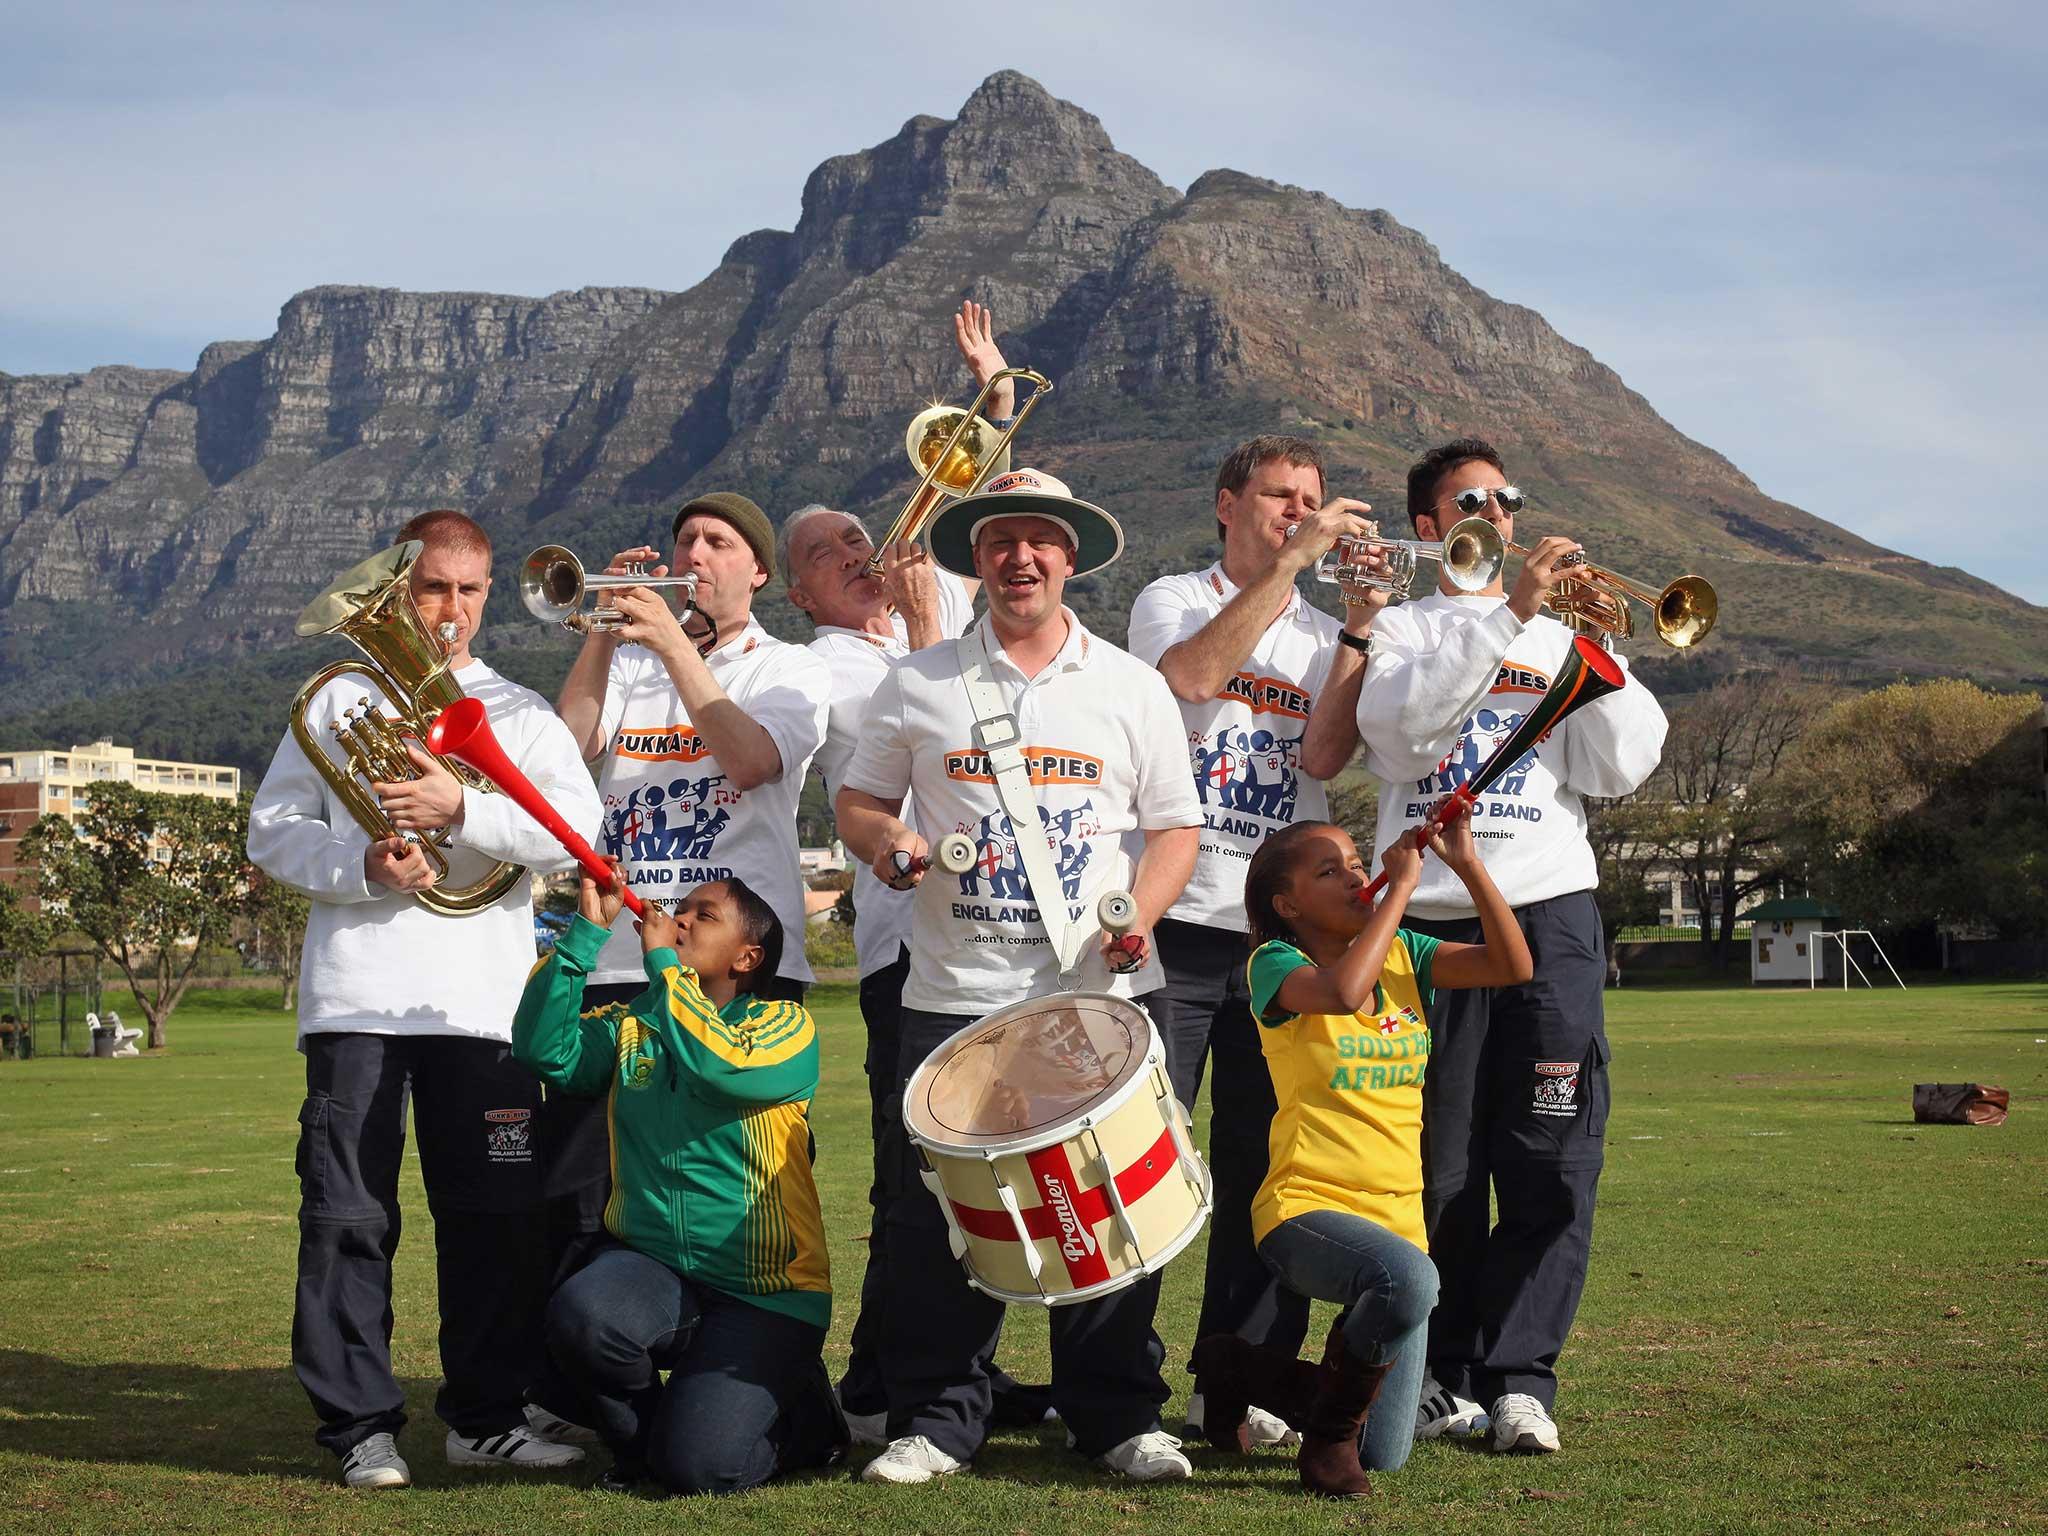 The England band have been a prominent feature of previous tournaments, including the 2010 World Cup in South Africa